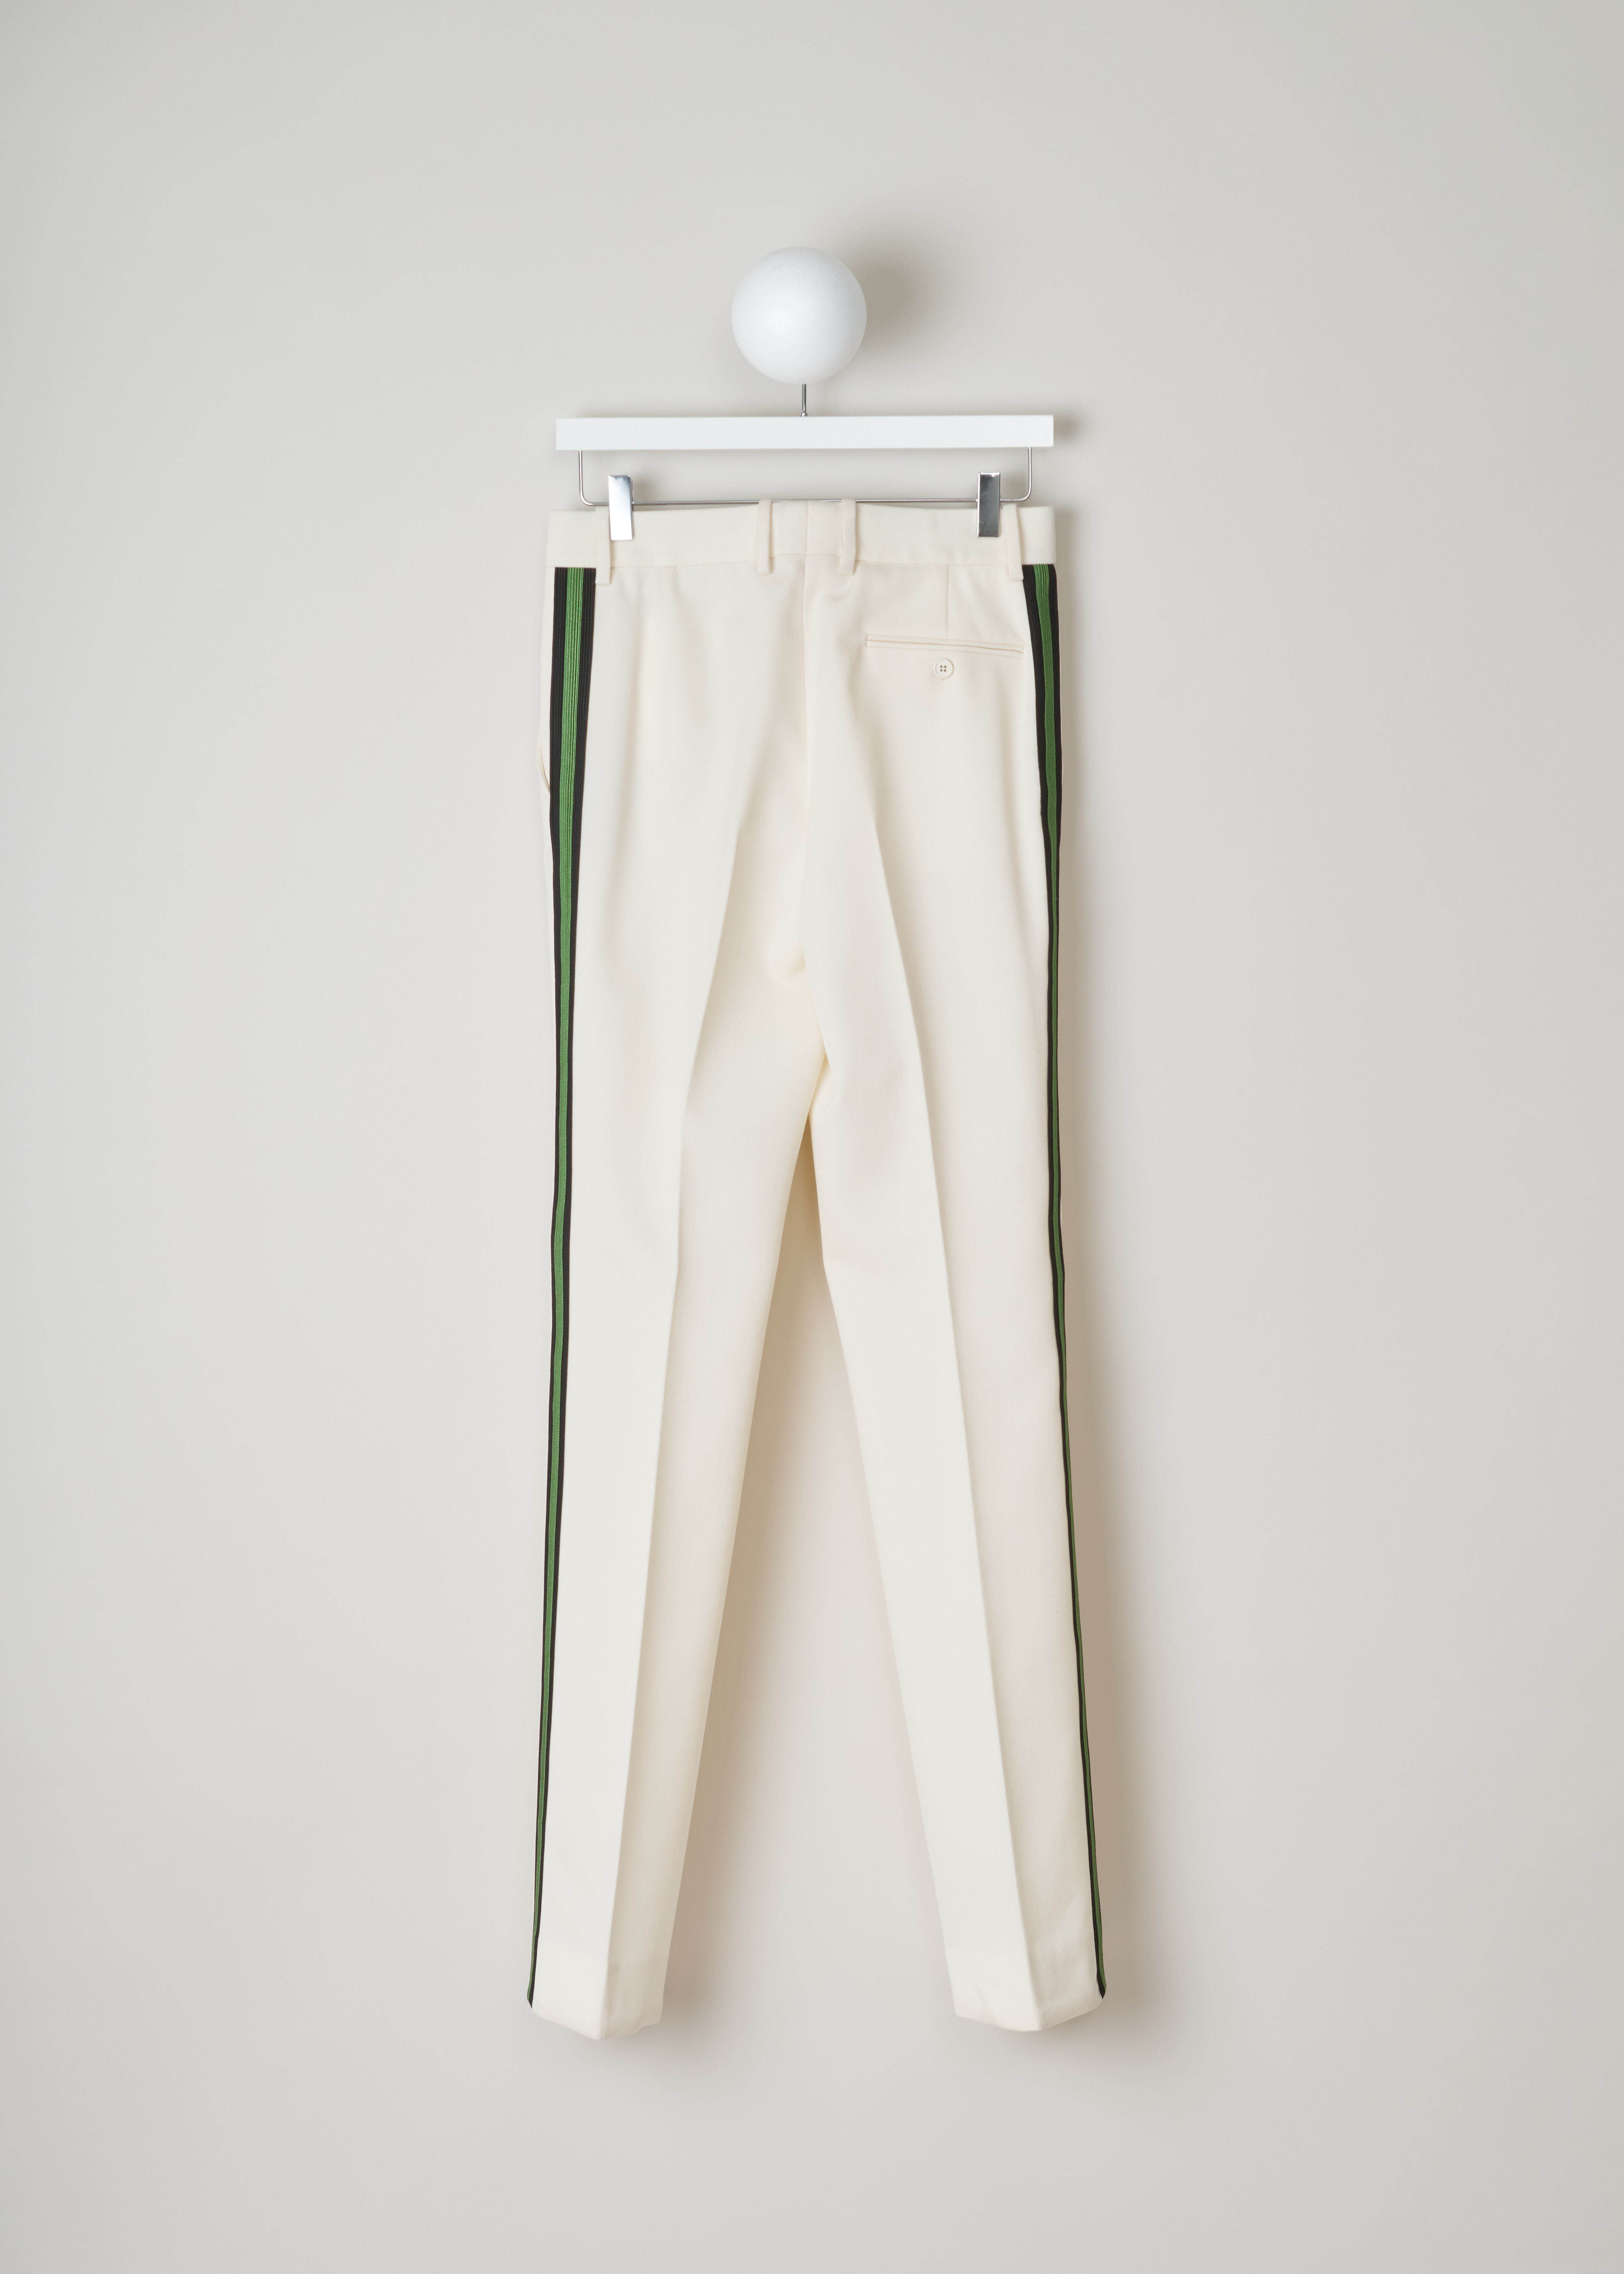 Calvin Klein 205W39NYC Off-white pants with ribbon trim
74WWPA47_W023_101 white back. Off-white wool pants with a green and black side ribbon trim.
These straight pants have two slant pockets on the front and a welt pocket on the back.